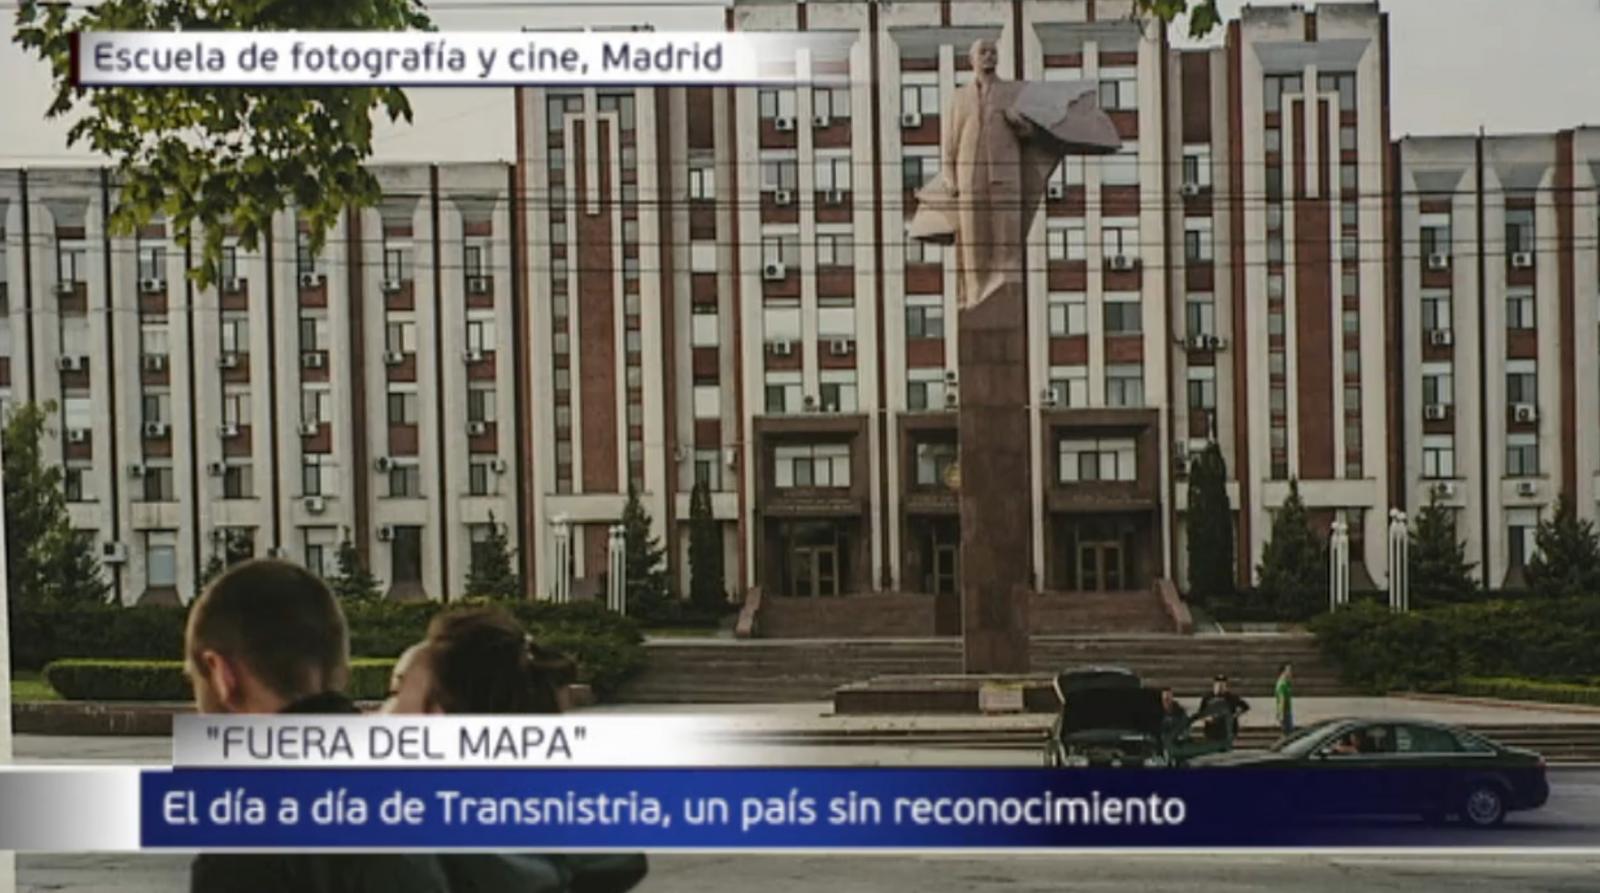 "Off the map" exhibition portrayed by Spanish TV 5